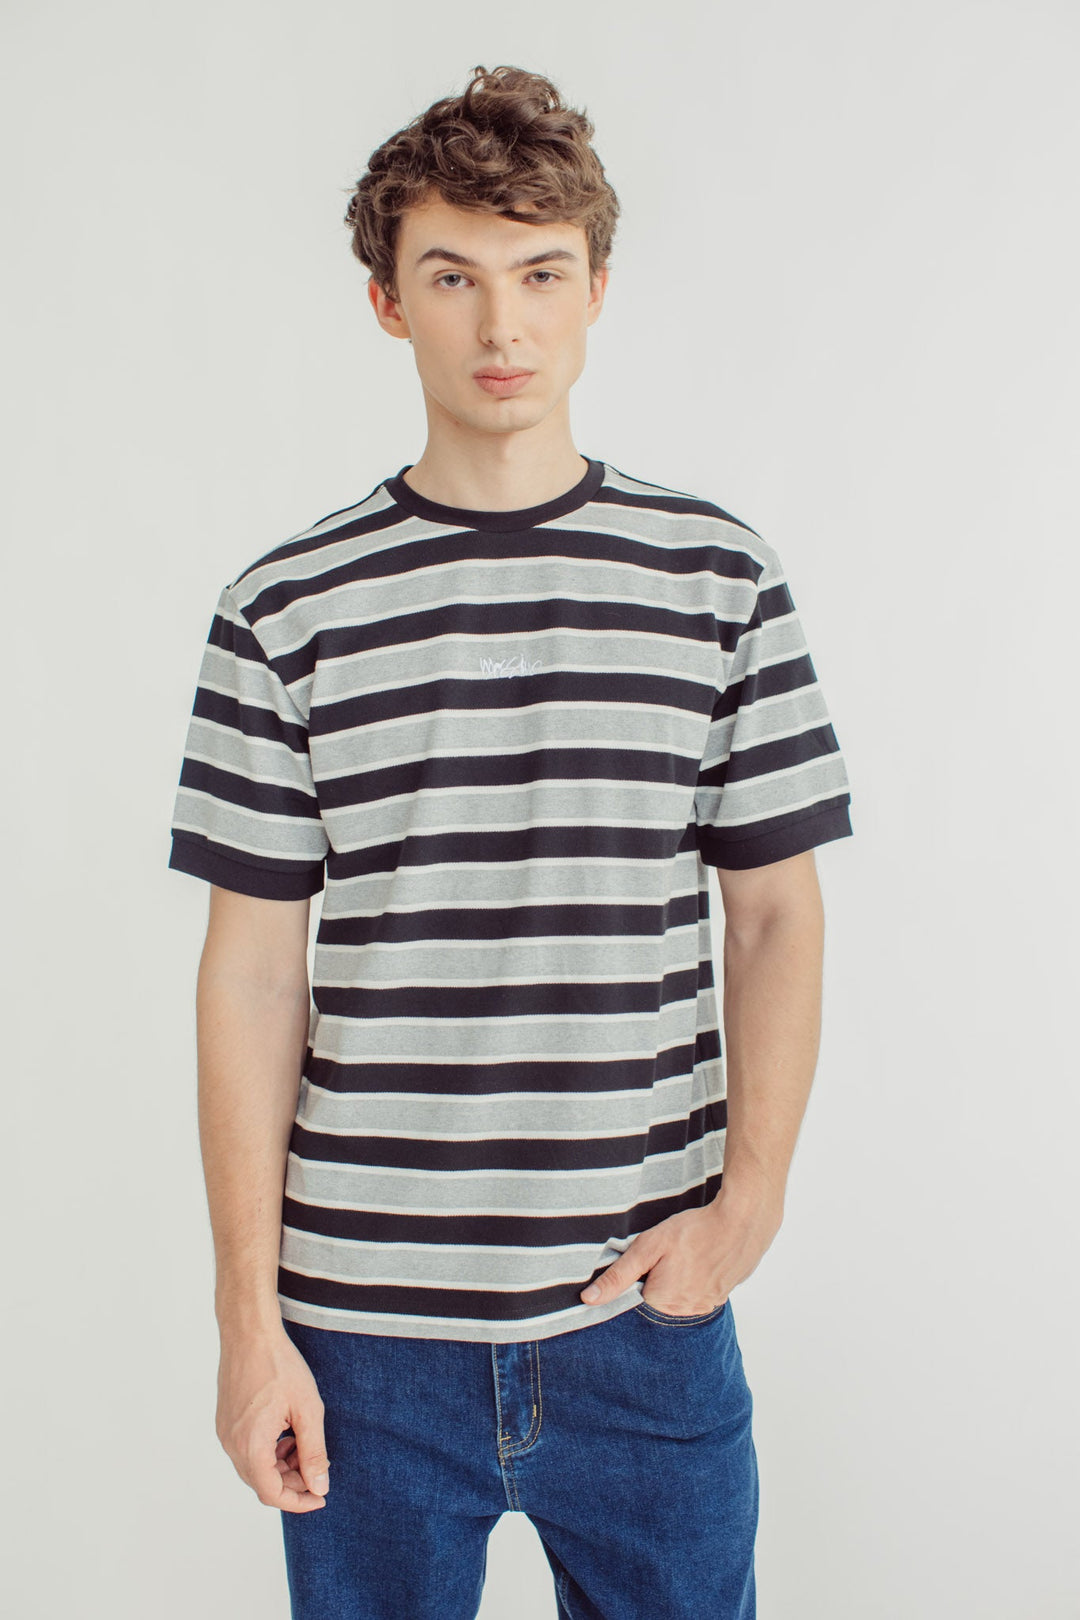 Marky Black Gray Stripes with Embroidery Comfort Fit Tee - Mossimo PH